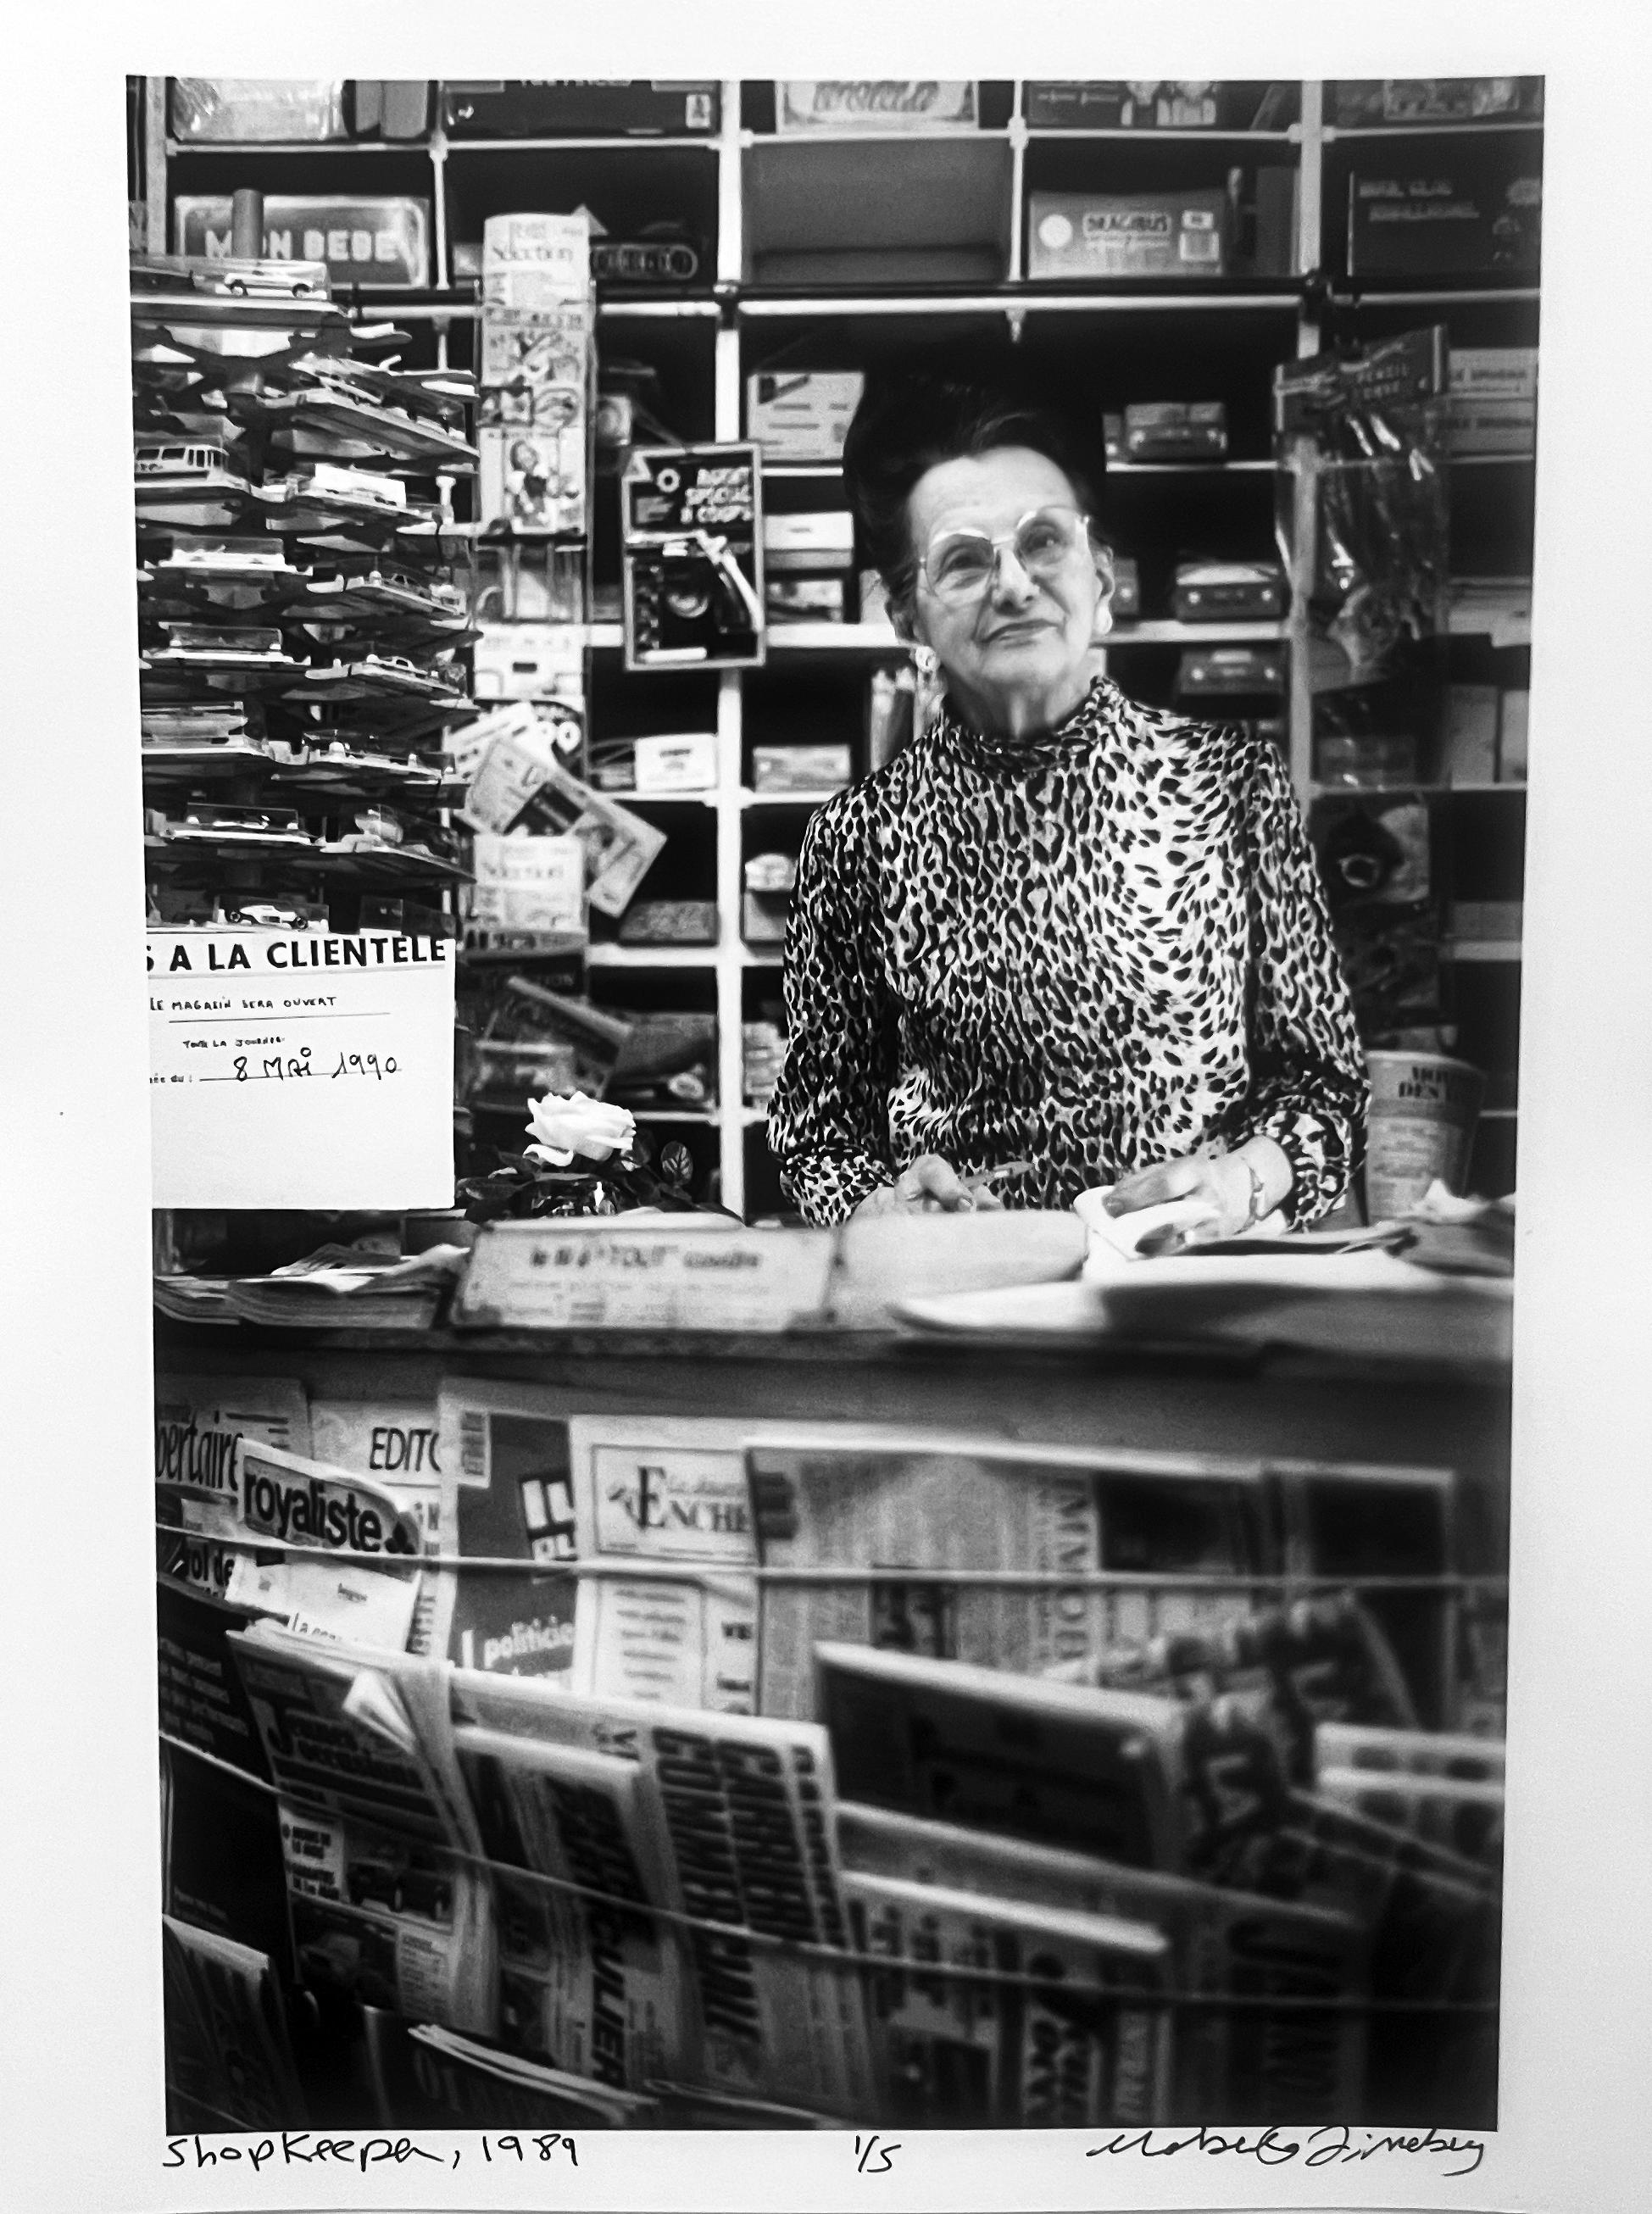 Shopkeeper, Black-and-White Street Photography Paris, France